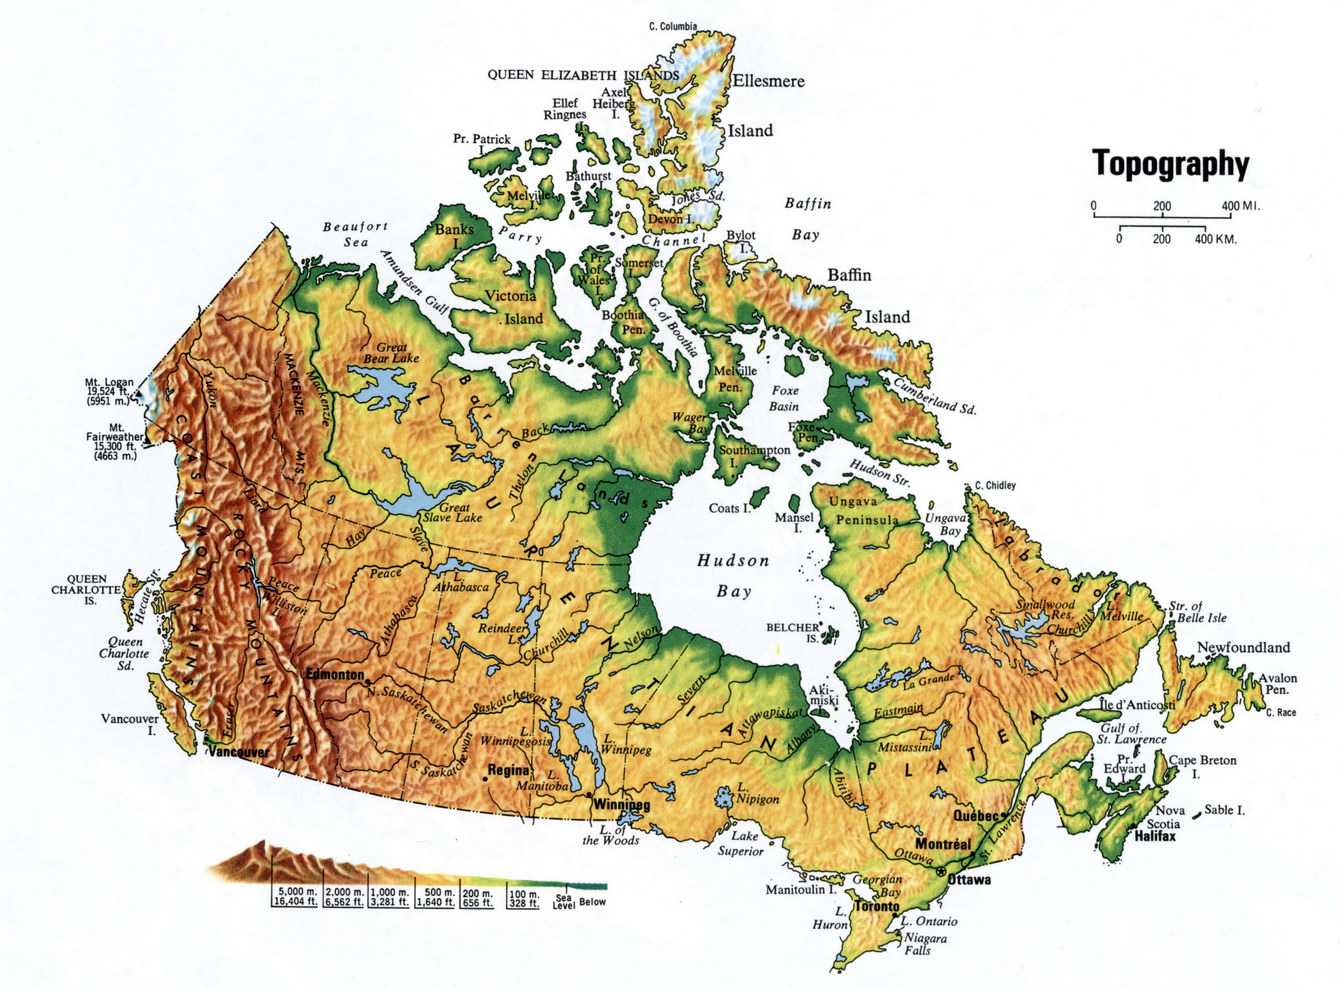 Topographical map of Canada